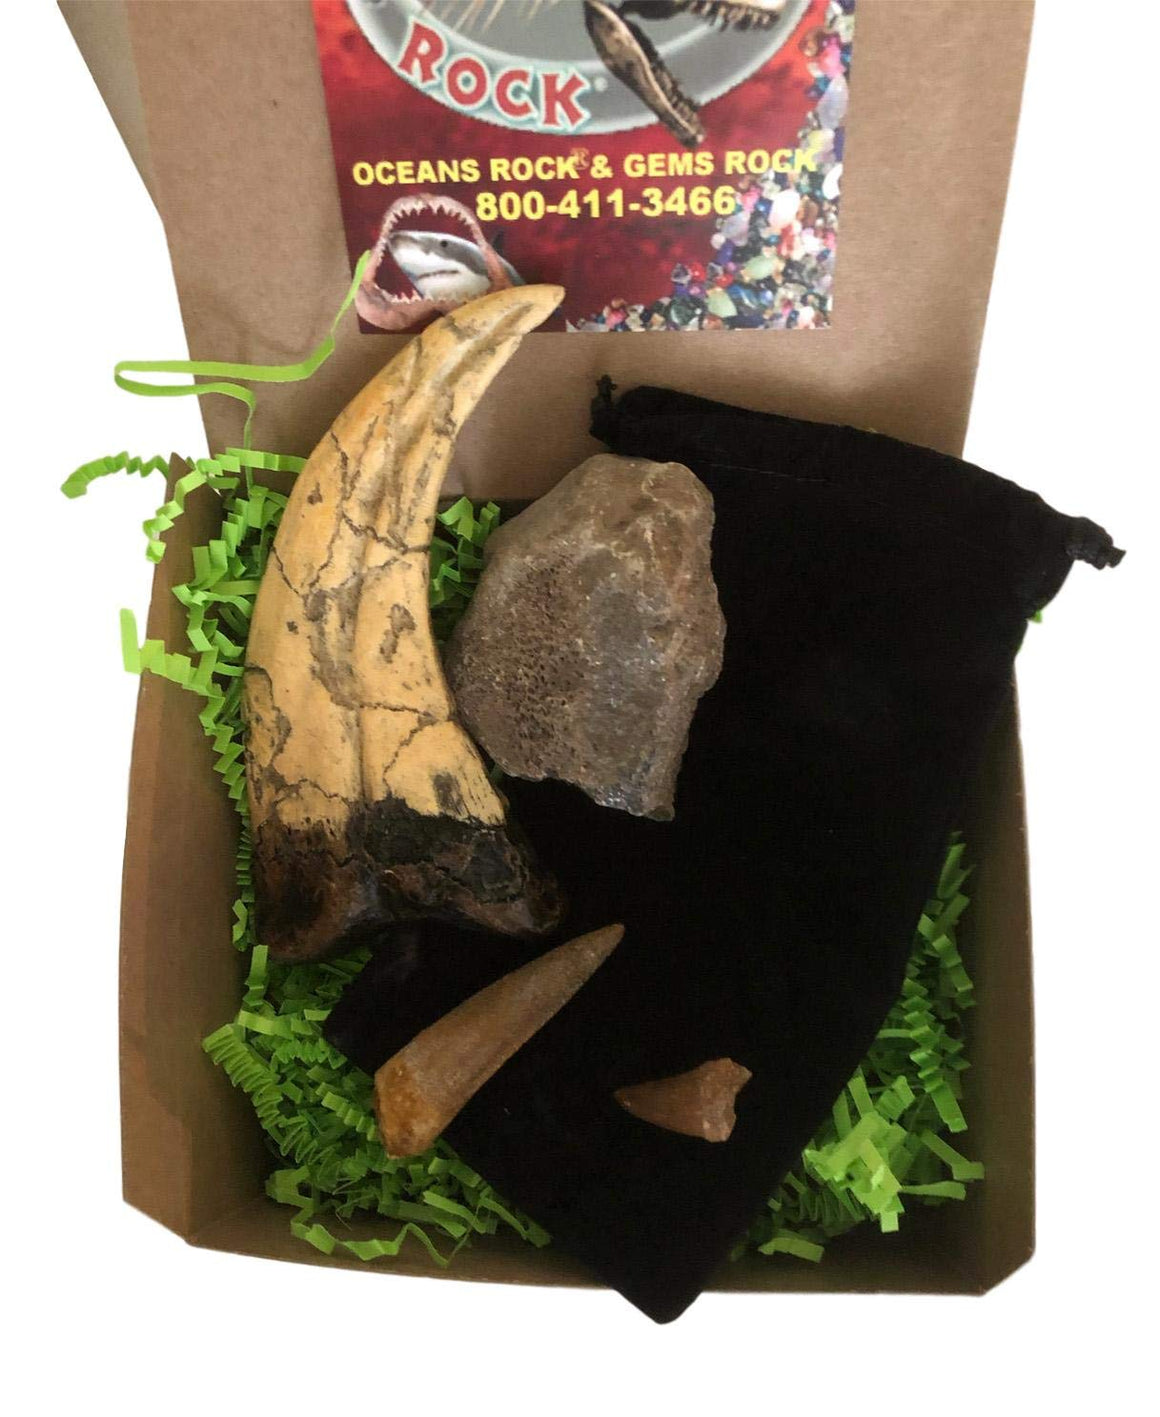 Dinosaur and Fossil Gift Collection - Set of 4 - Real Dinosaur Bone, Mosasaur Tooth, Spinosaurus Dinosaur Tooth and Raptor Claw Replica - dinosaursrocksuperstore